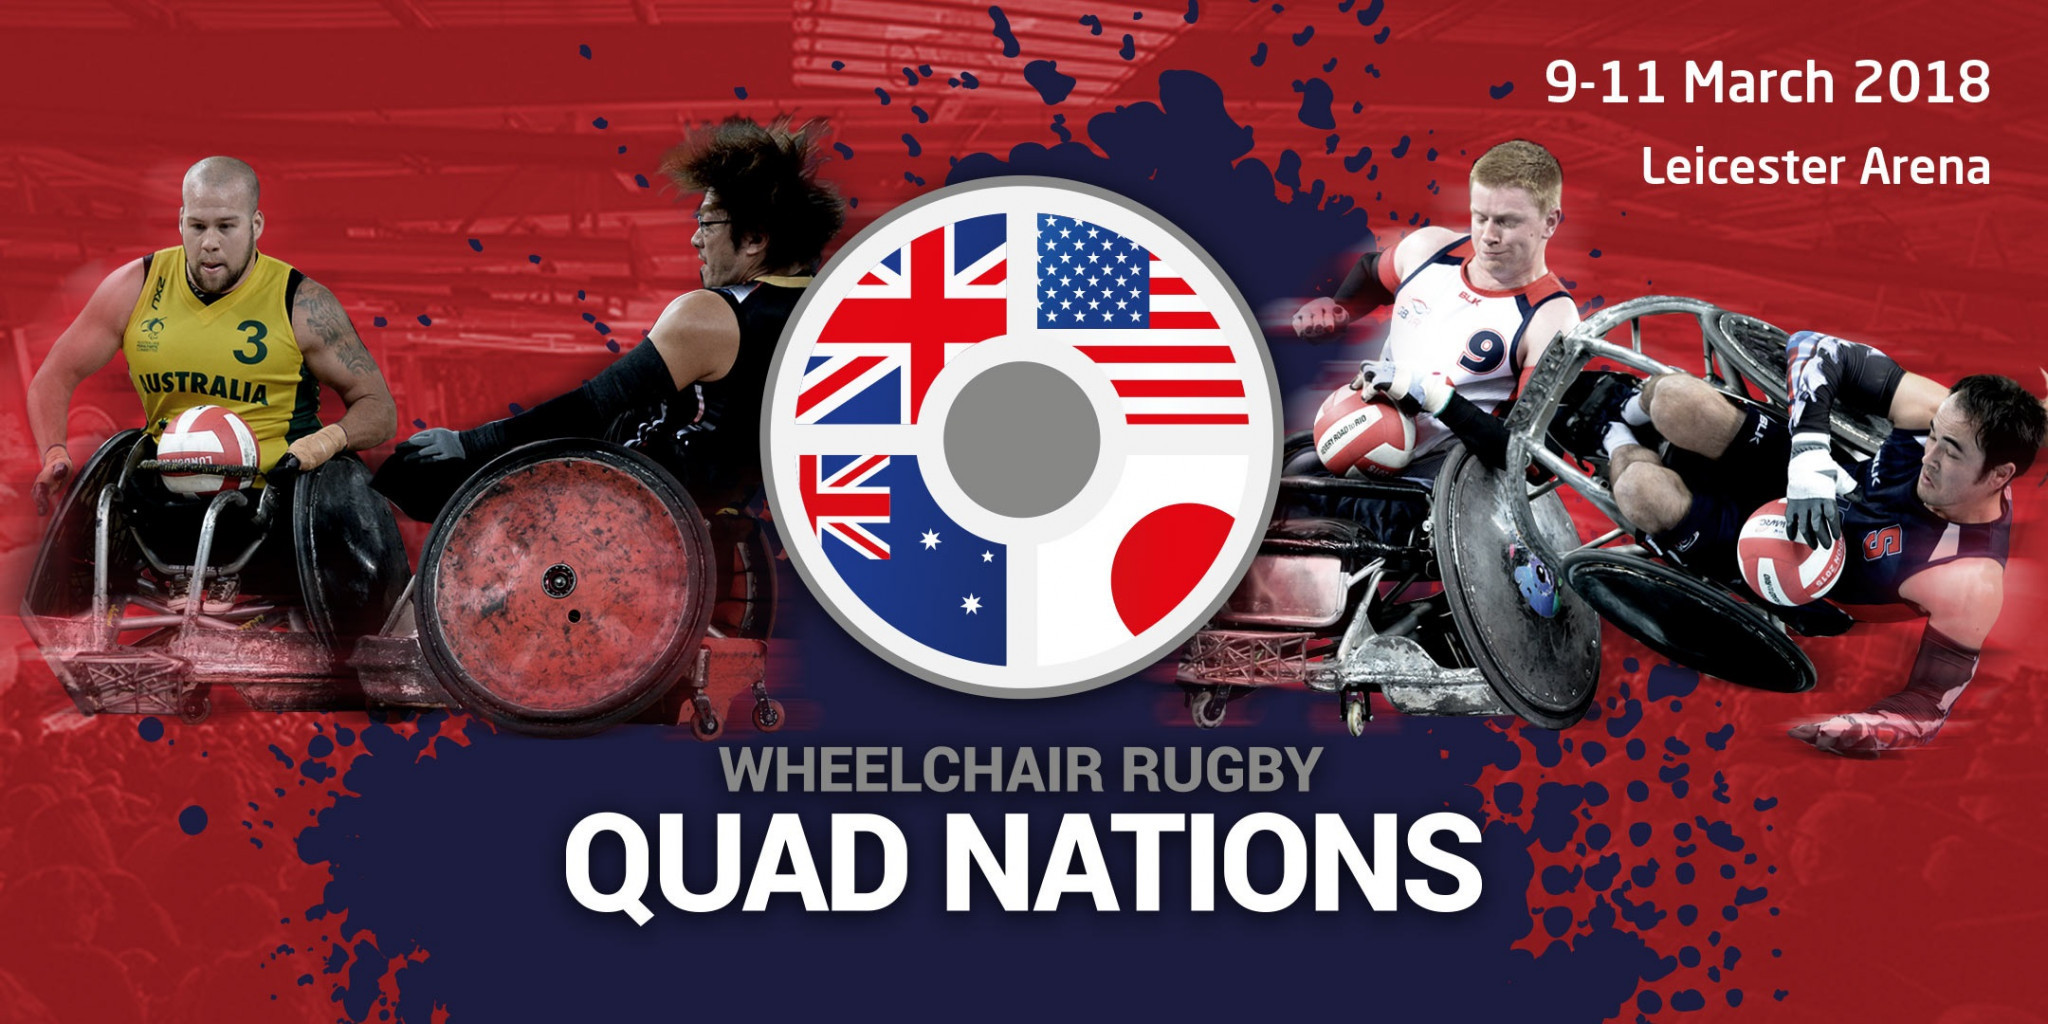 King Power will serve as the title sponsor of the Wheelchair Rugby Quad Nations ©GBWR